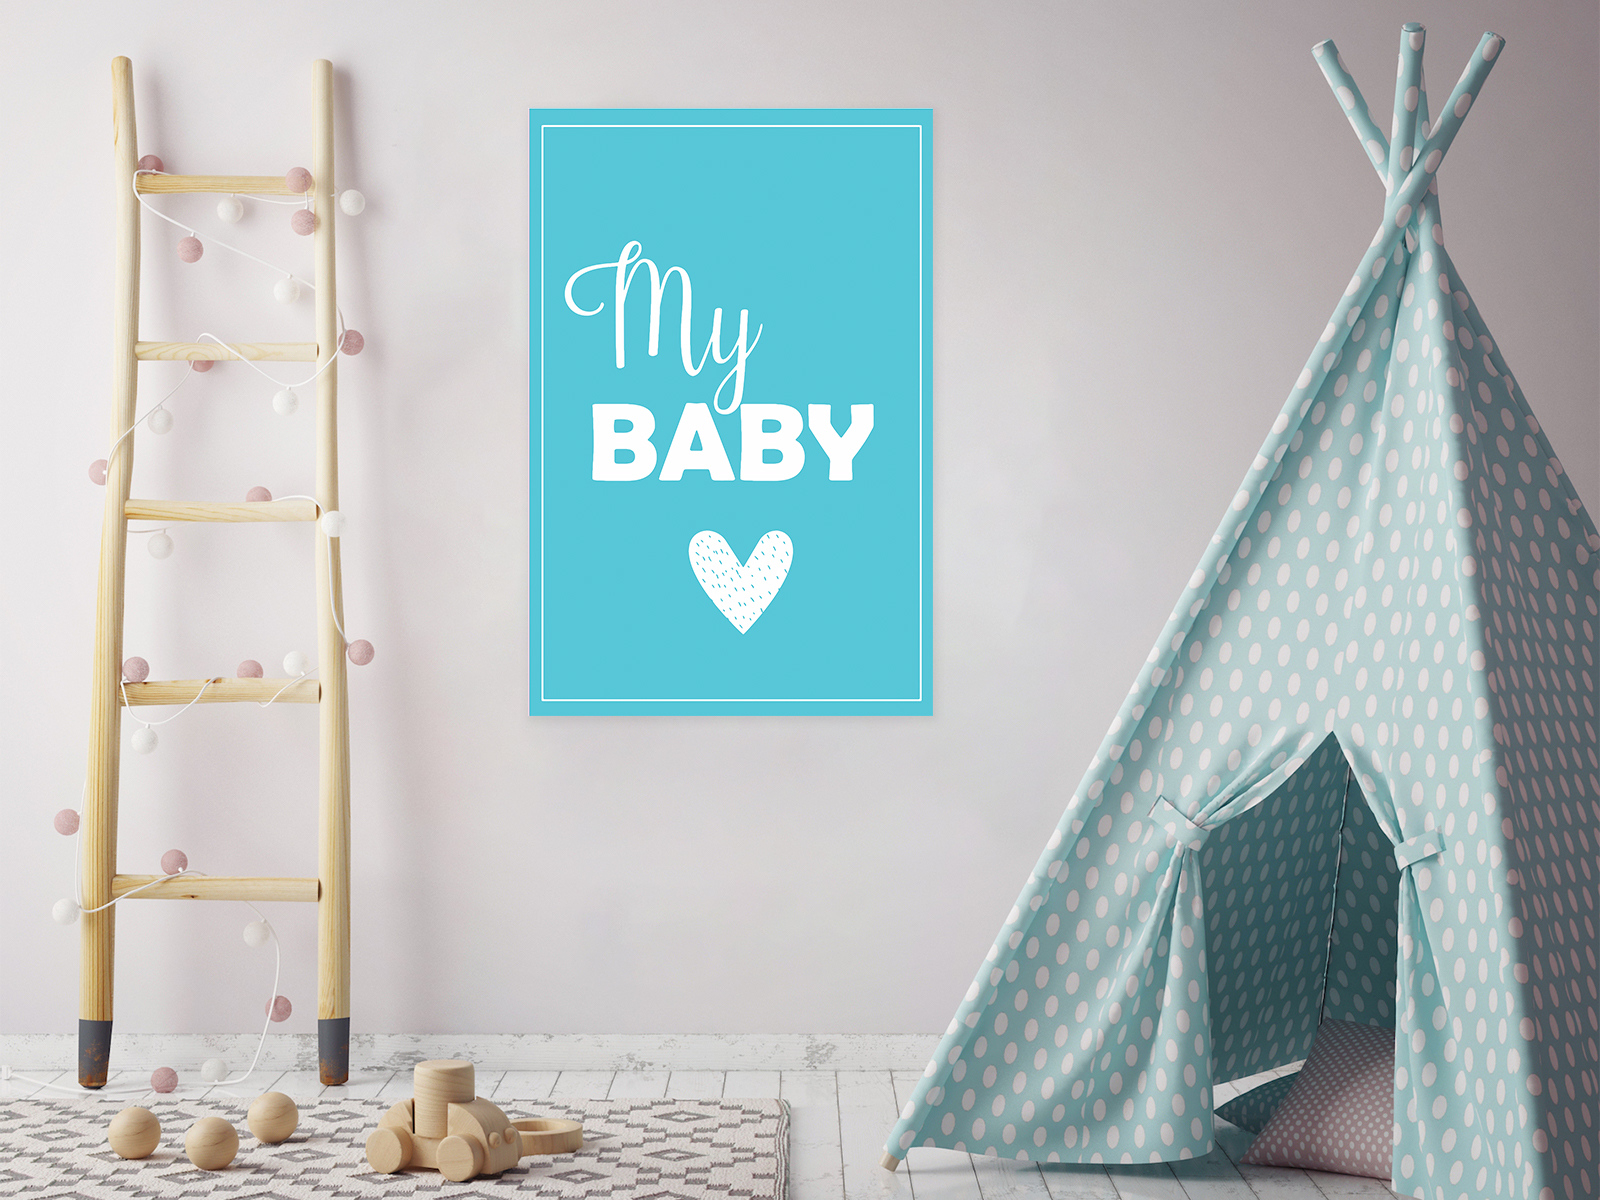 Awkward Styles My Baby Poster Wall Art Kids Room Wall Decor Blue Poster Baby Room Decor Gifts for Kids Baby Boys Room Printed Art Decals Newborn Baby Room Poster Wall Decor Mother Quotes Poster Art - image 2 of 3